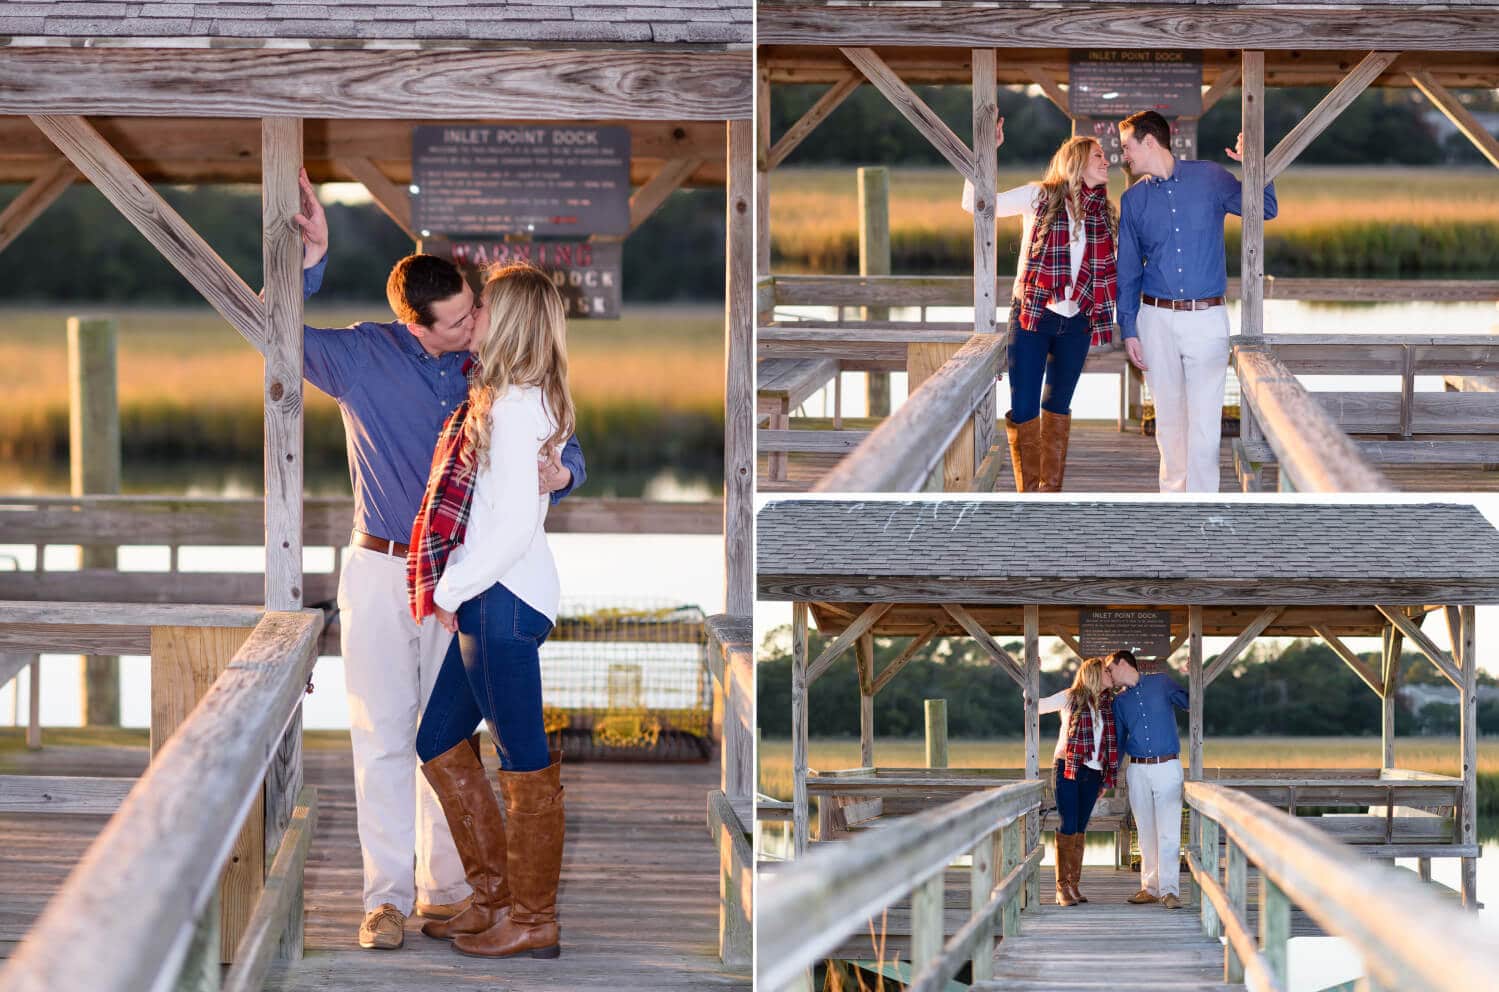 Couple hugging on the Inlet Point Dock in Garden City